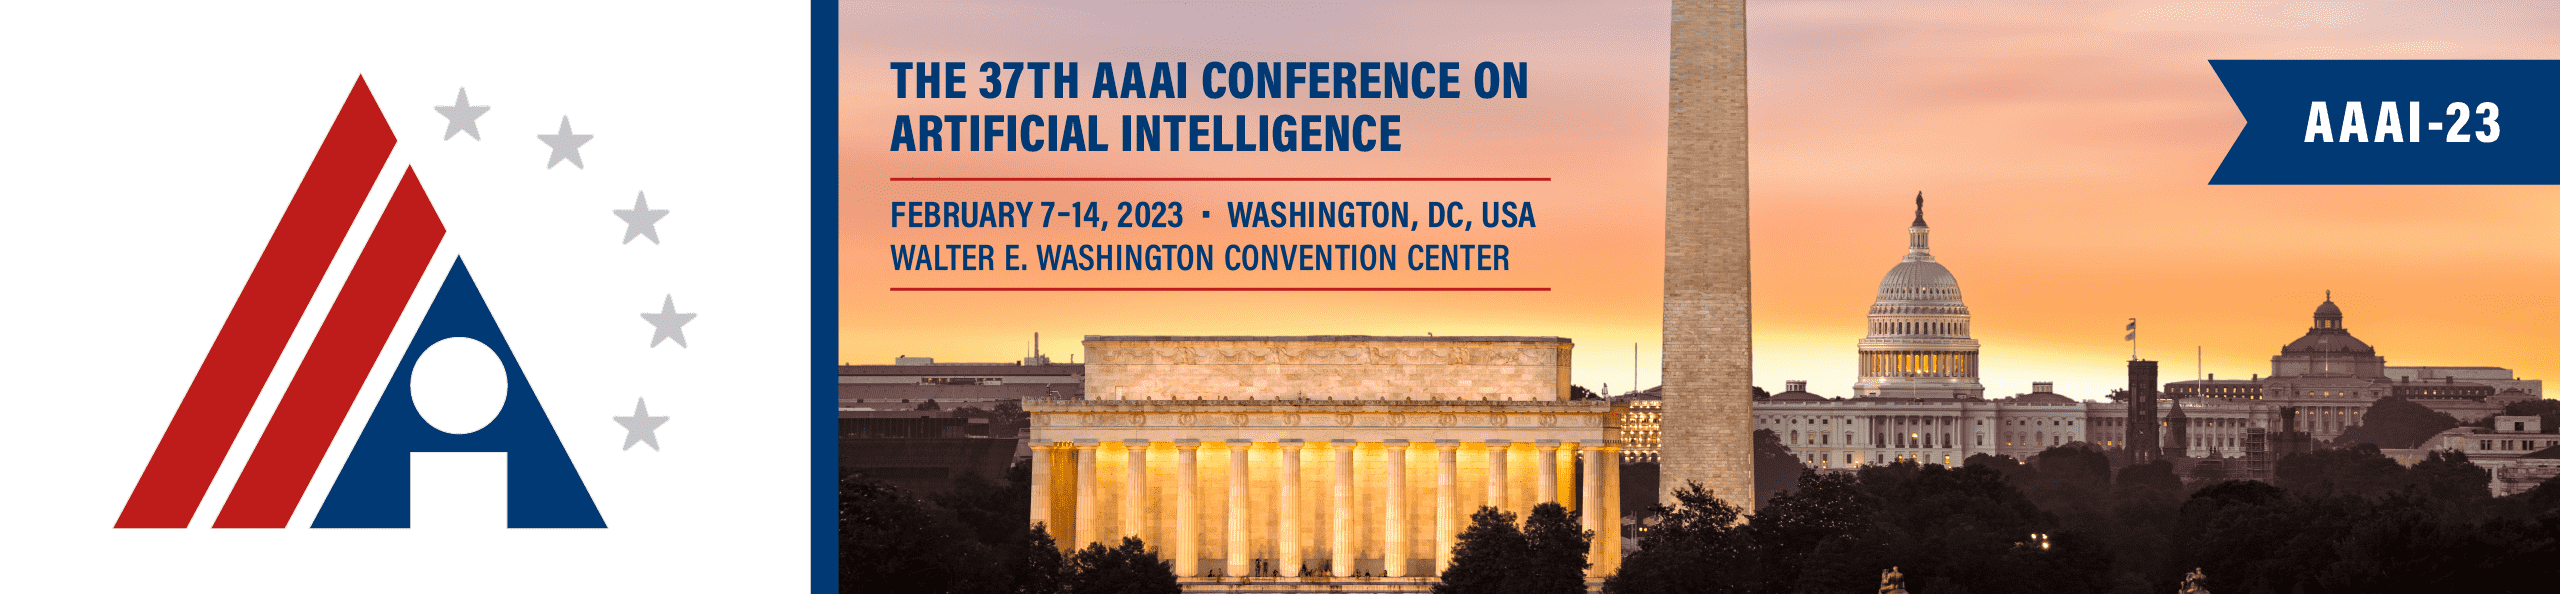 37th AAAI Conference On Aritificial Intelligence 2023